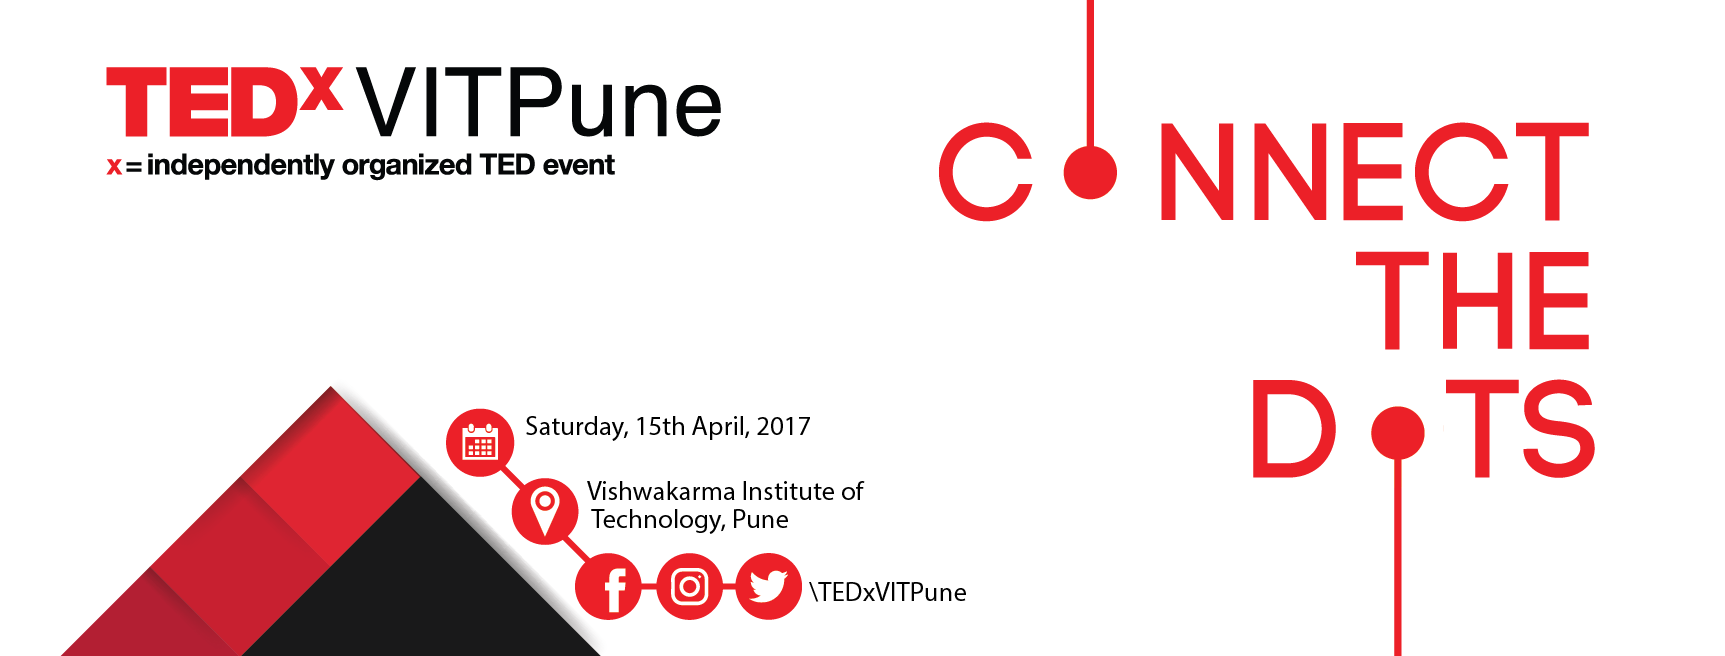 TEDxVITPune-2017-Connecting-the-Dots